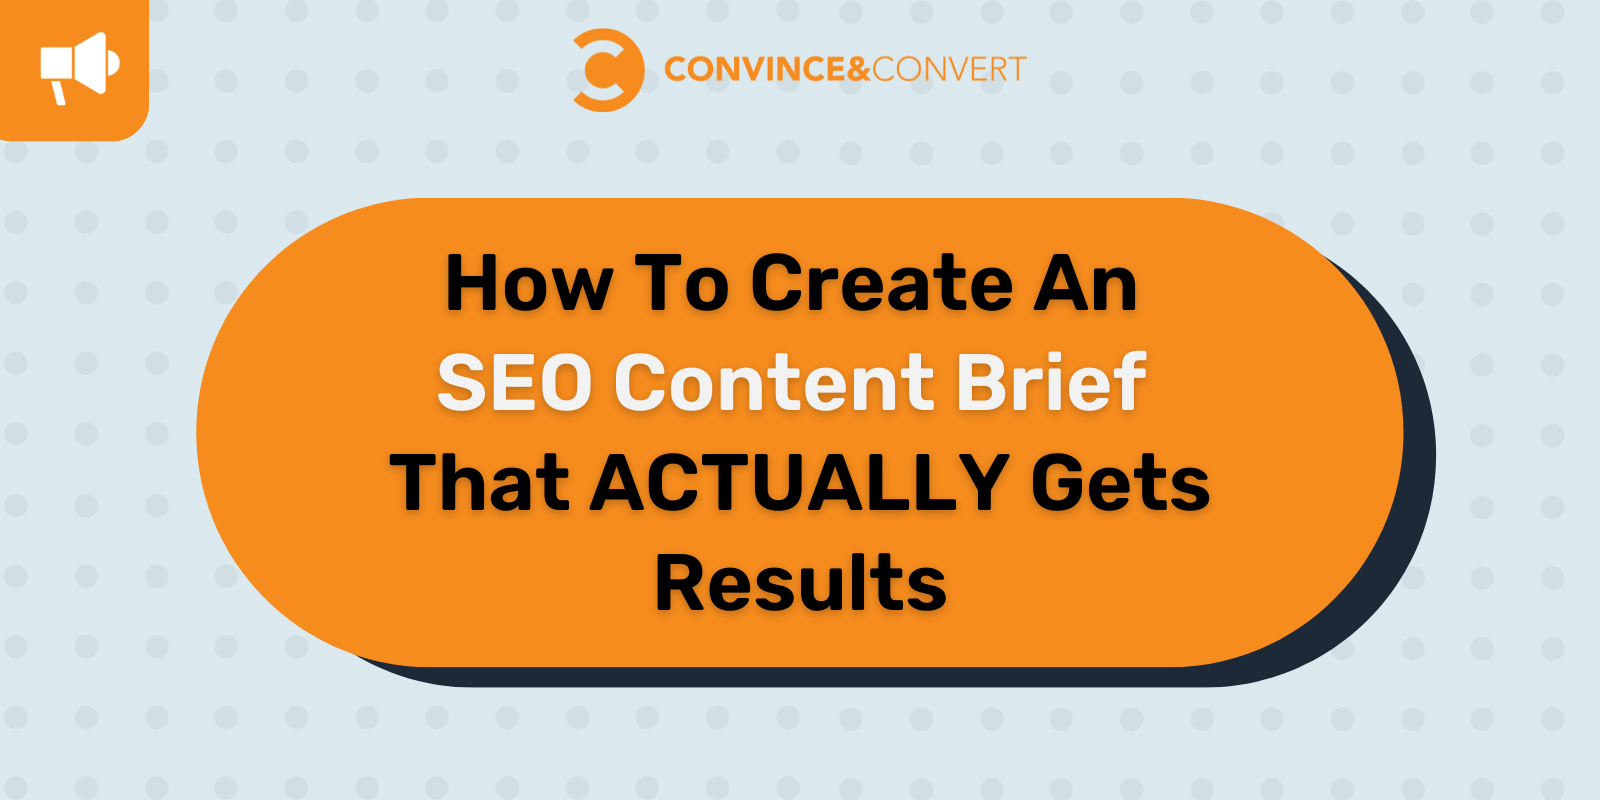 You are currently viewing How To Create An SEO Content Brief That ACTUALLY Gets Results